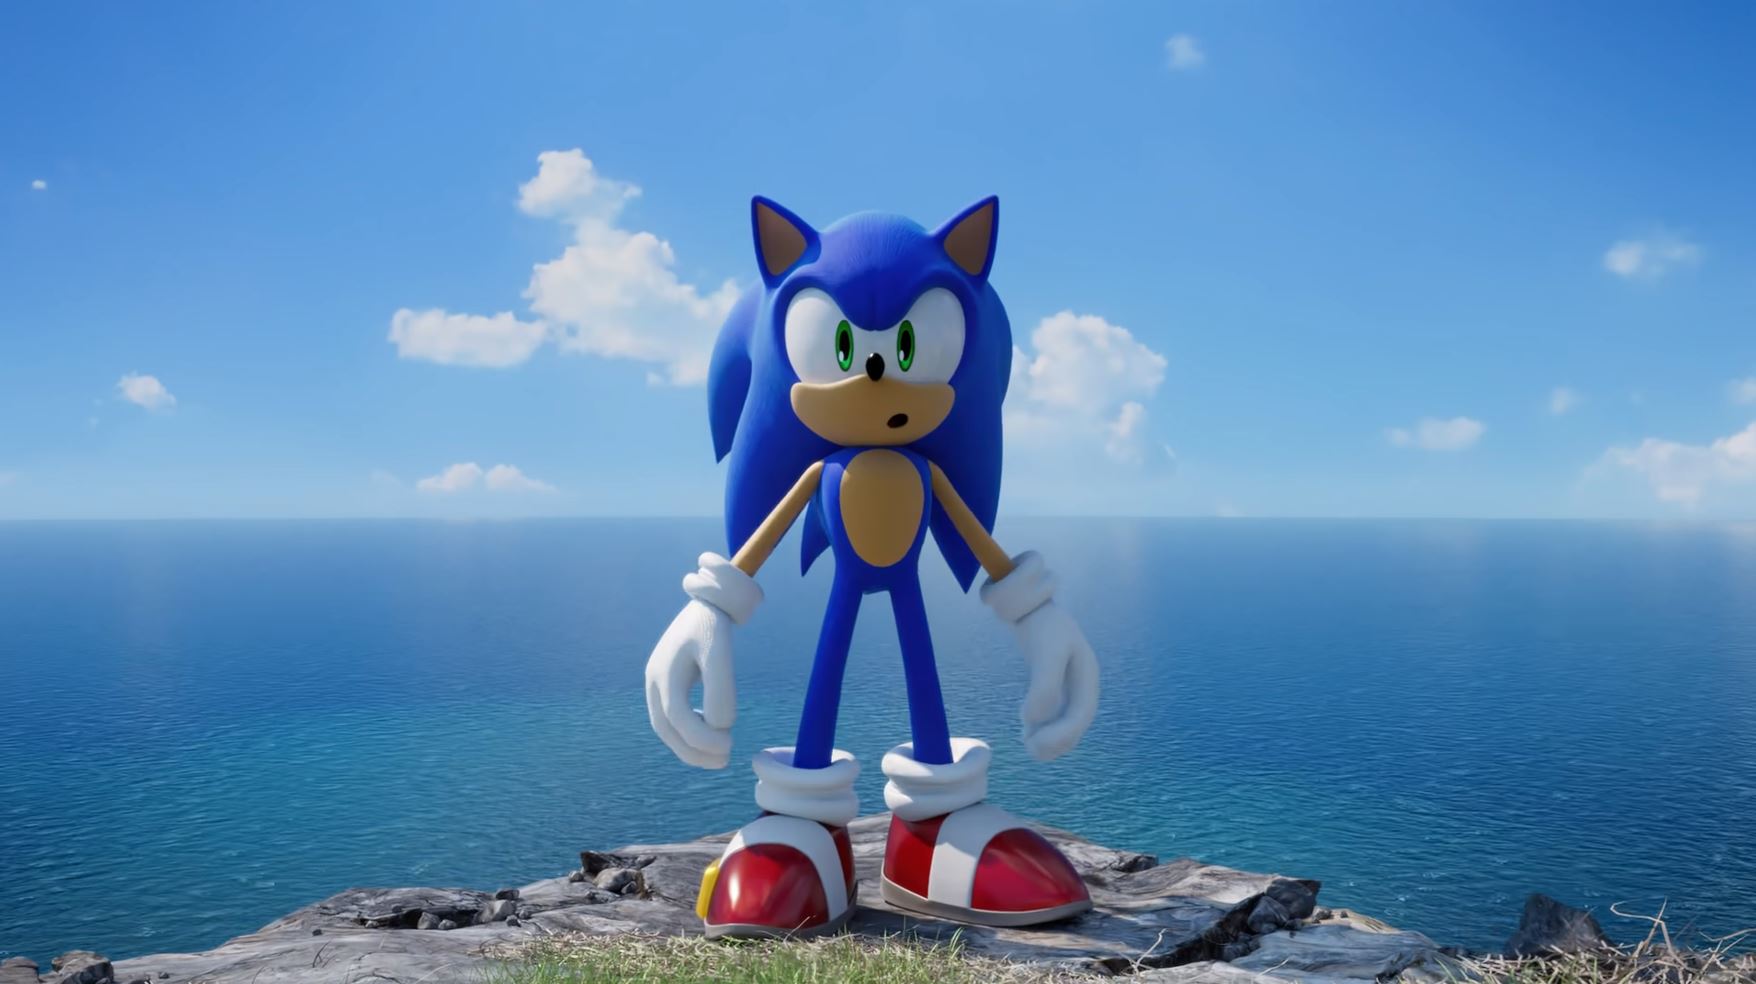 Sonic the hedgehog: Blue trouble – The adventures of Jesse and Sonic